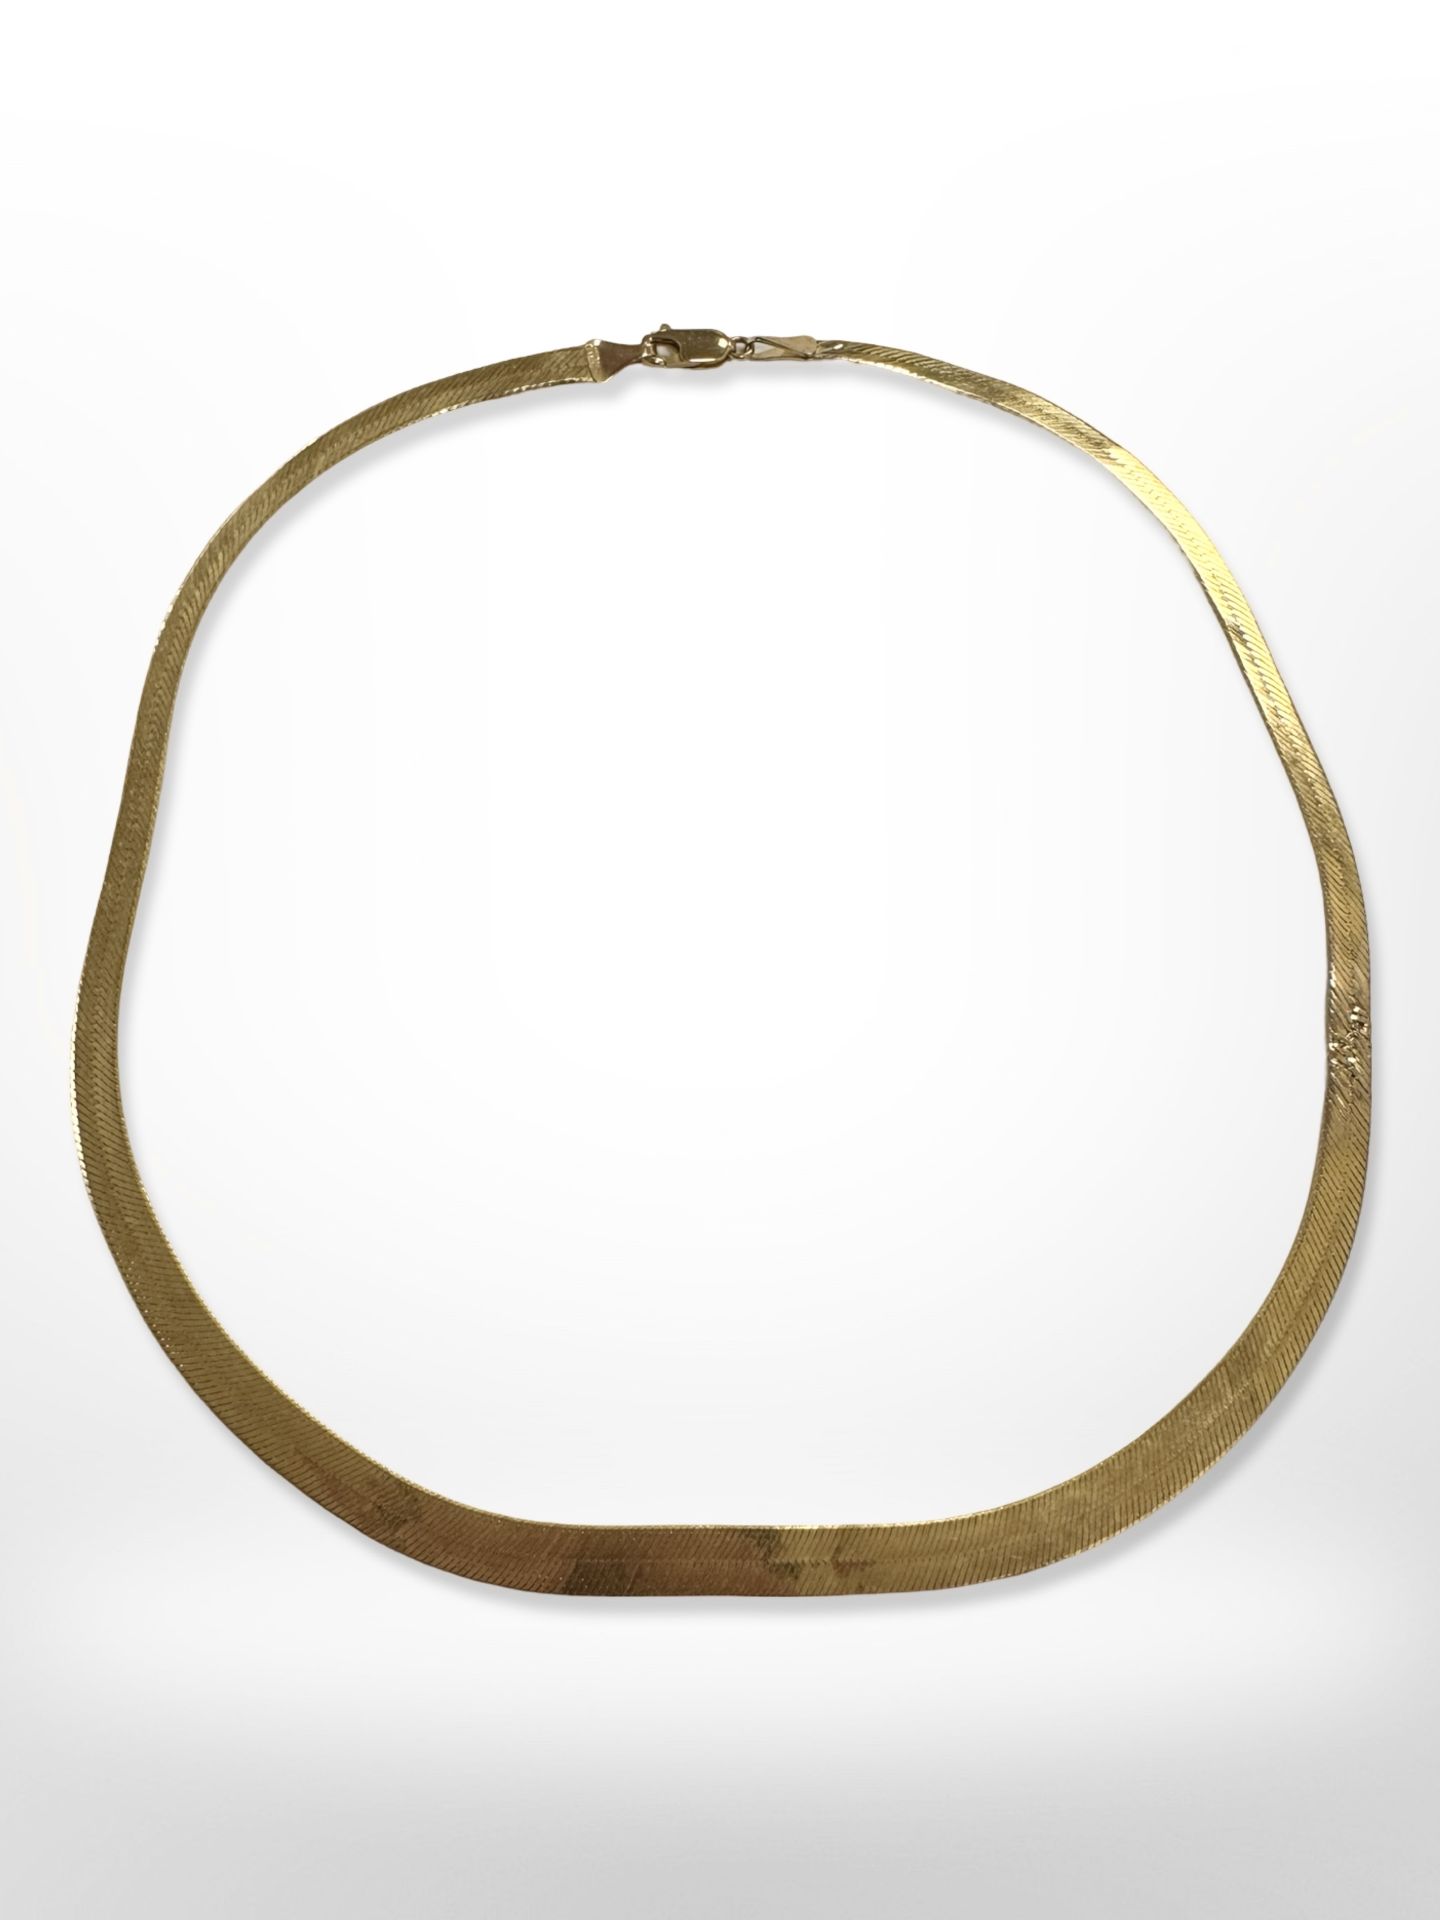 A 9ct yellow gold Italian flat link necklace, length 42 cm. CONDITION REPORT: 7g.